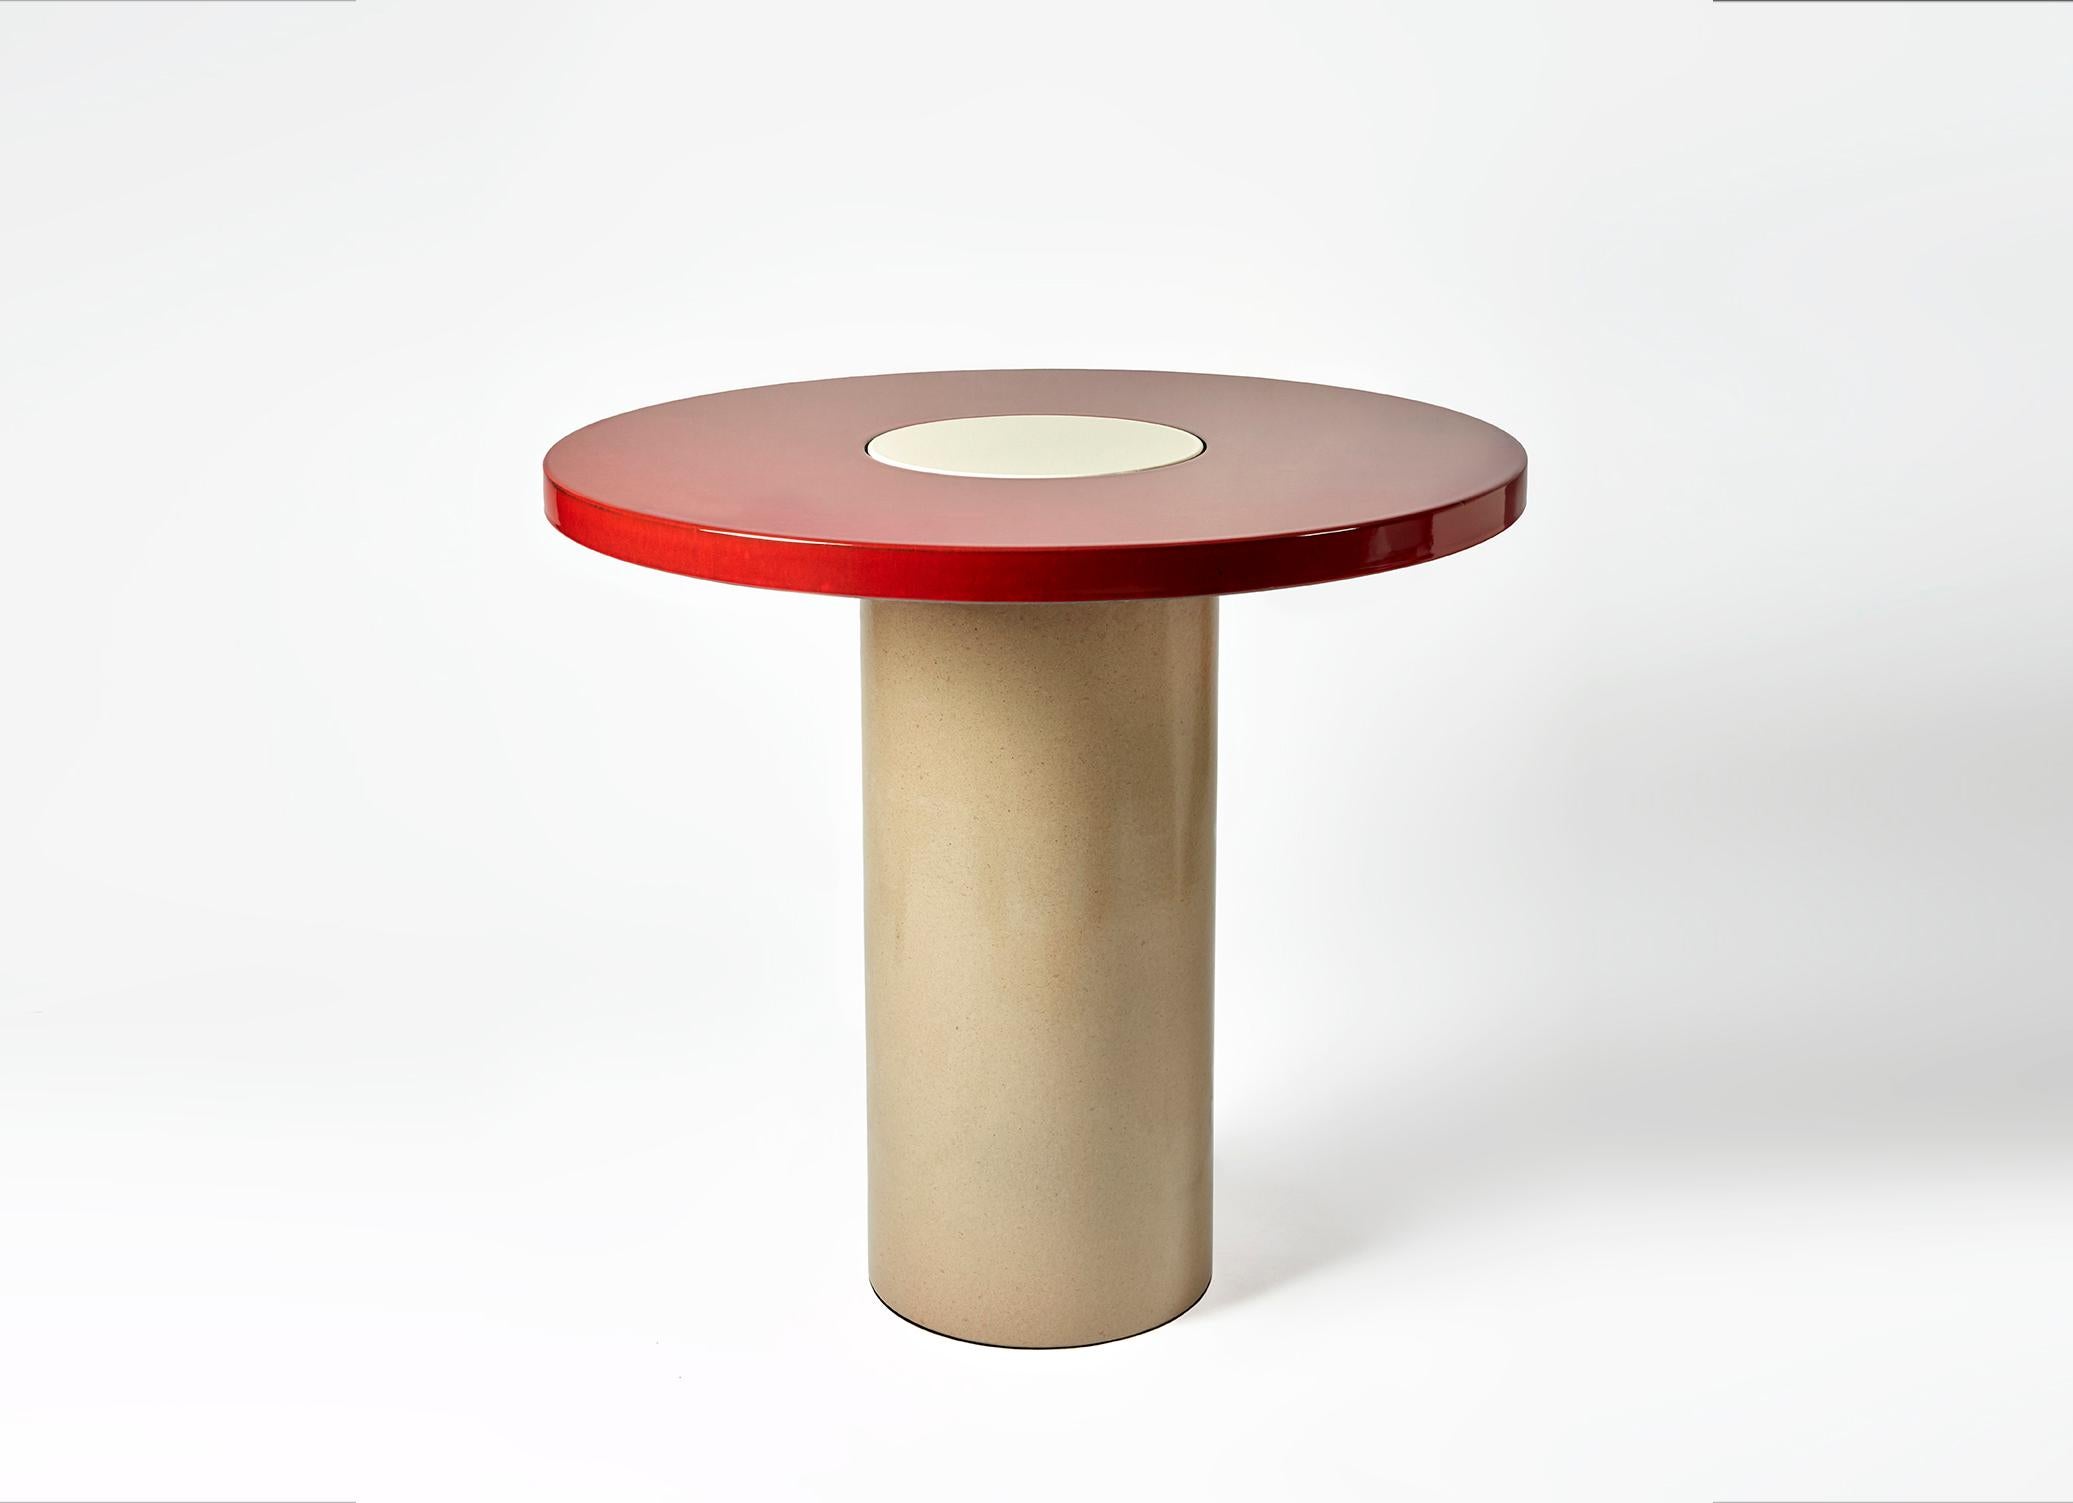 Breakfast patio table by Gisbert Pöppler
Dimensions: D 80 x W 80 x H 72 cm
Materials: Glazed lavastone

The simplicity of forms and cheerful glazed colors of this side table make it suitable for almost any space, outdoor or inside. This petit